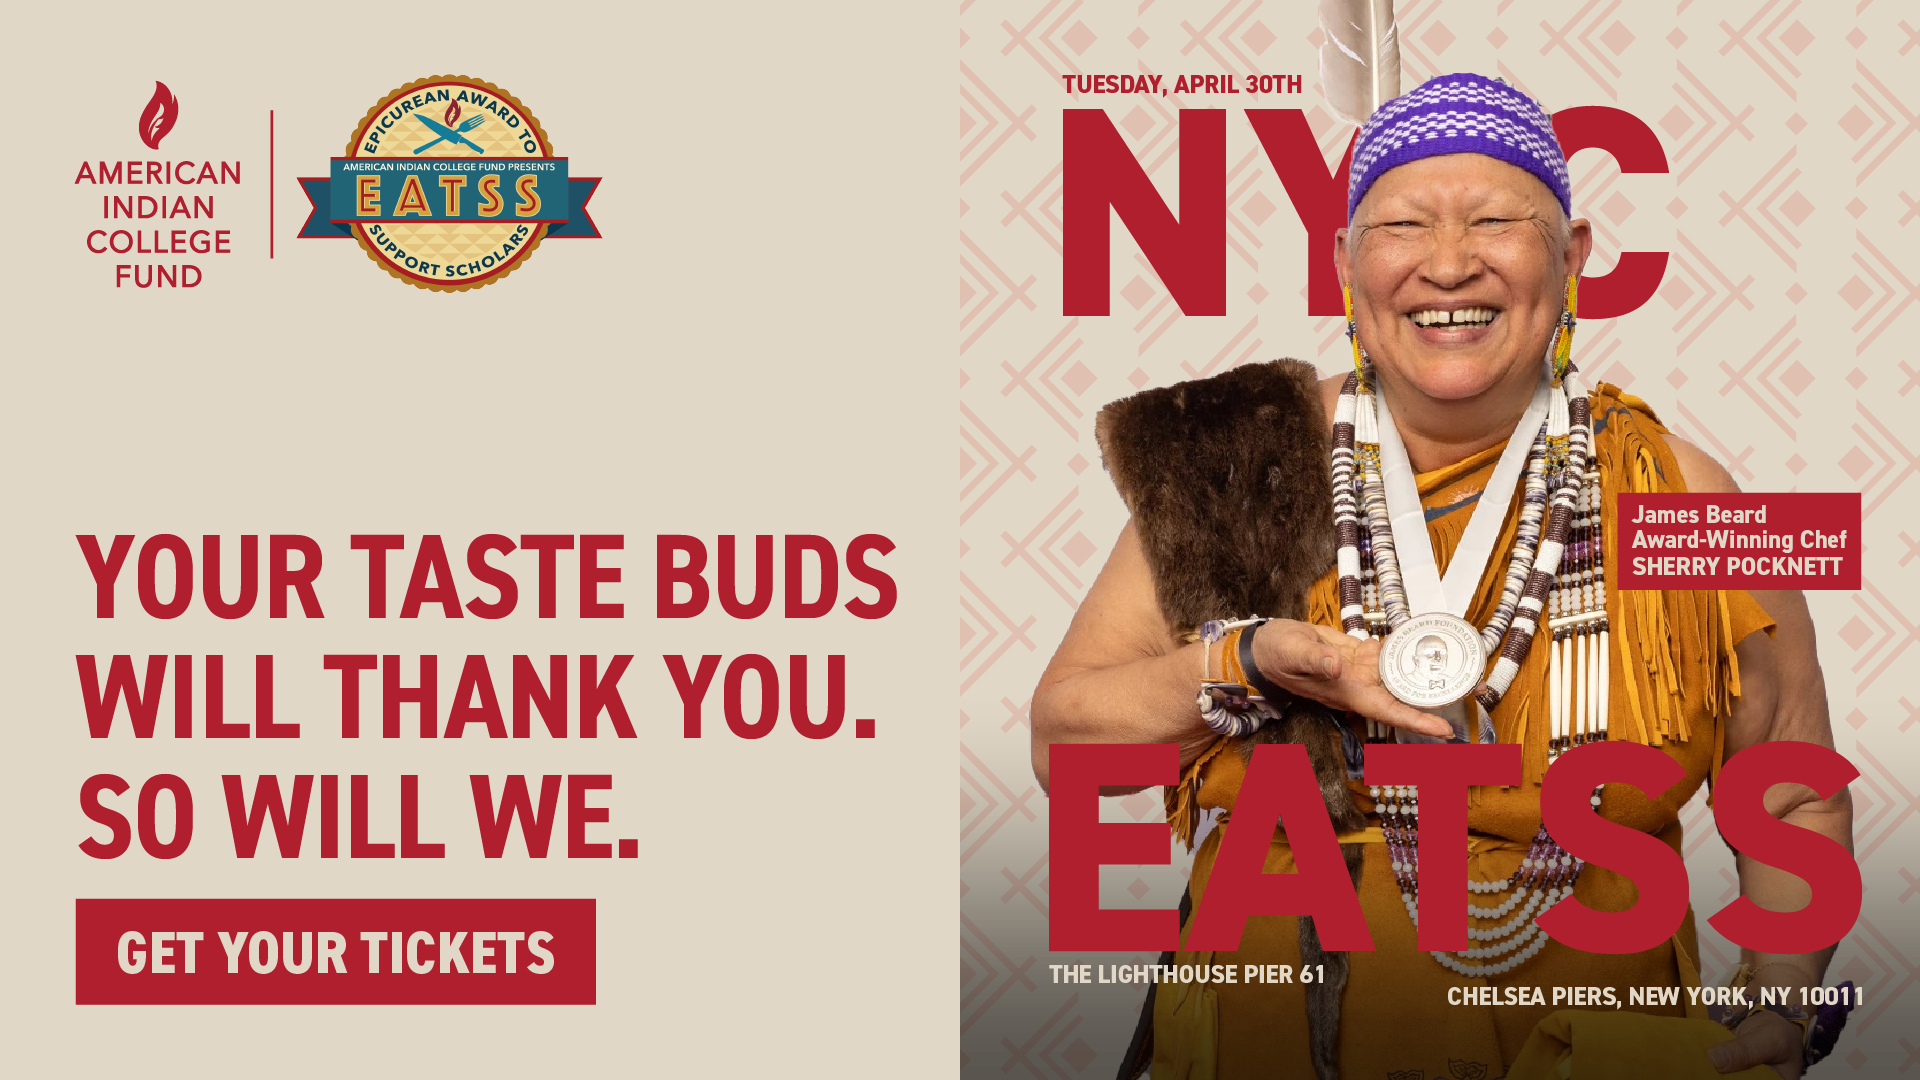 NYC EATSS — Immersive Celebration of Native Culture, Food and